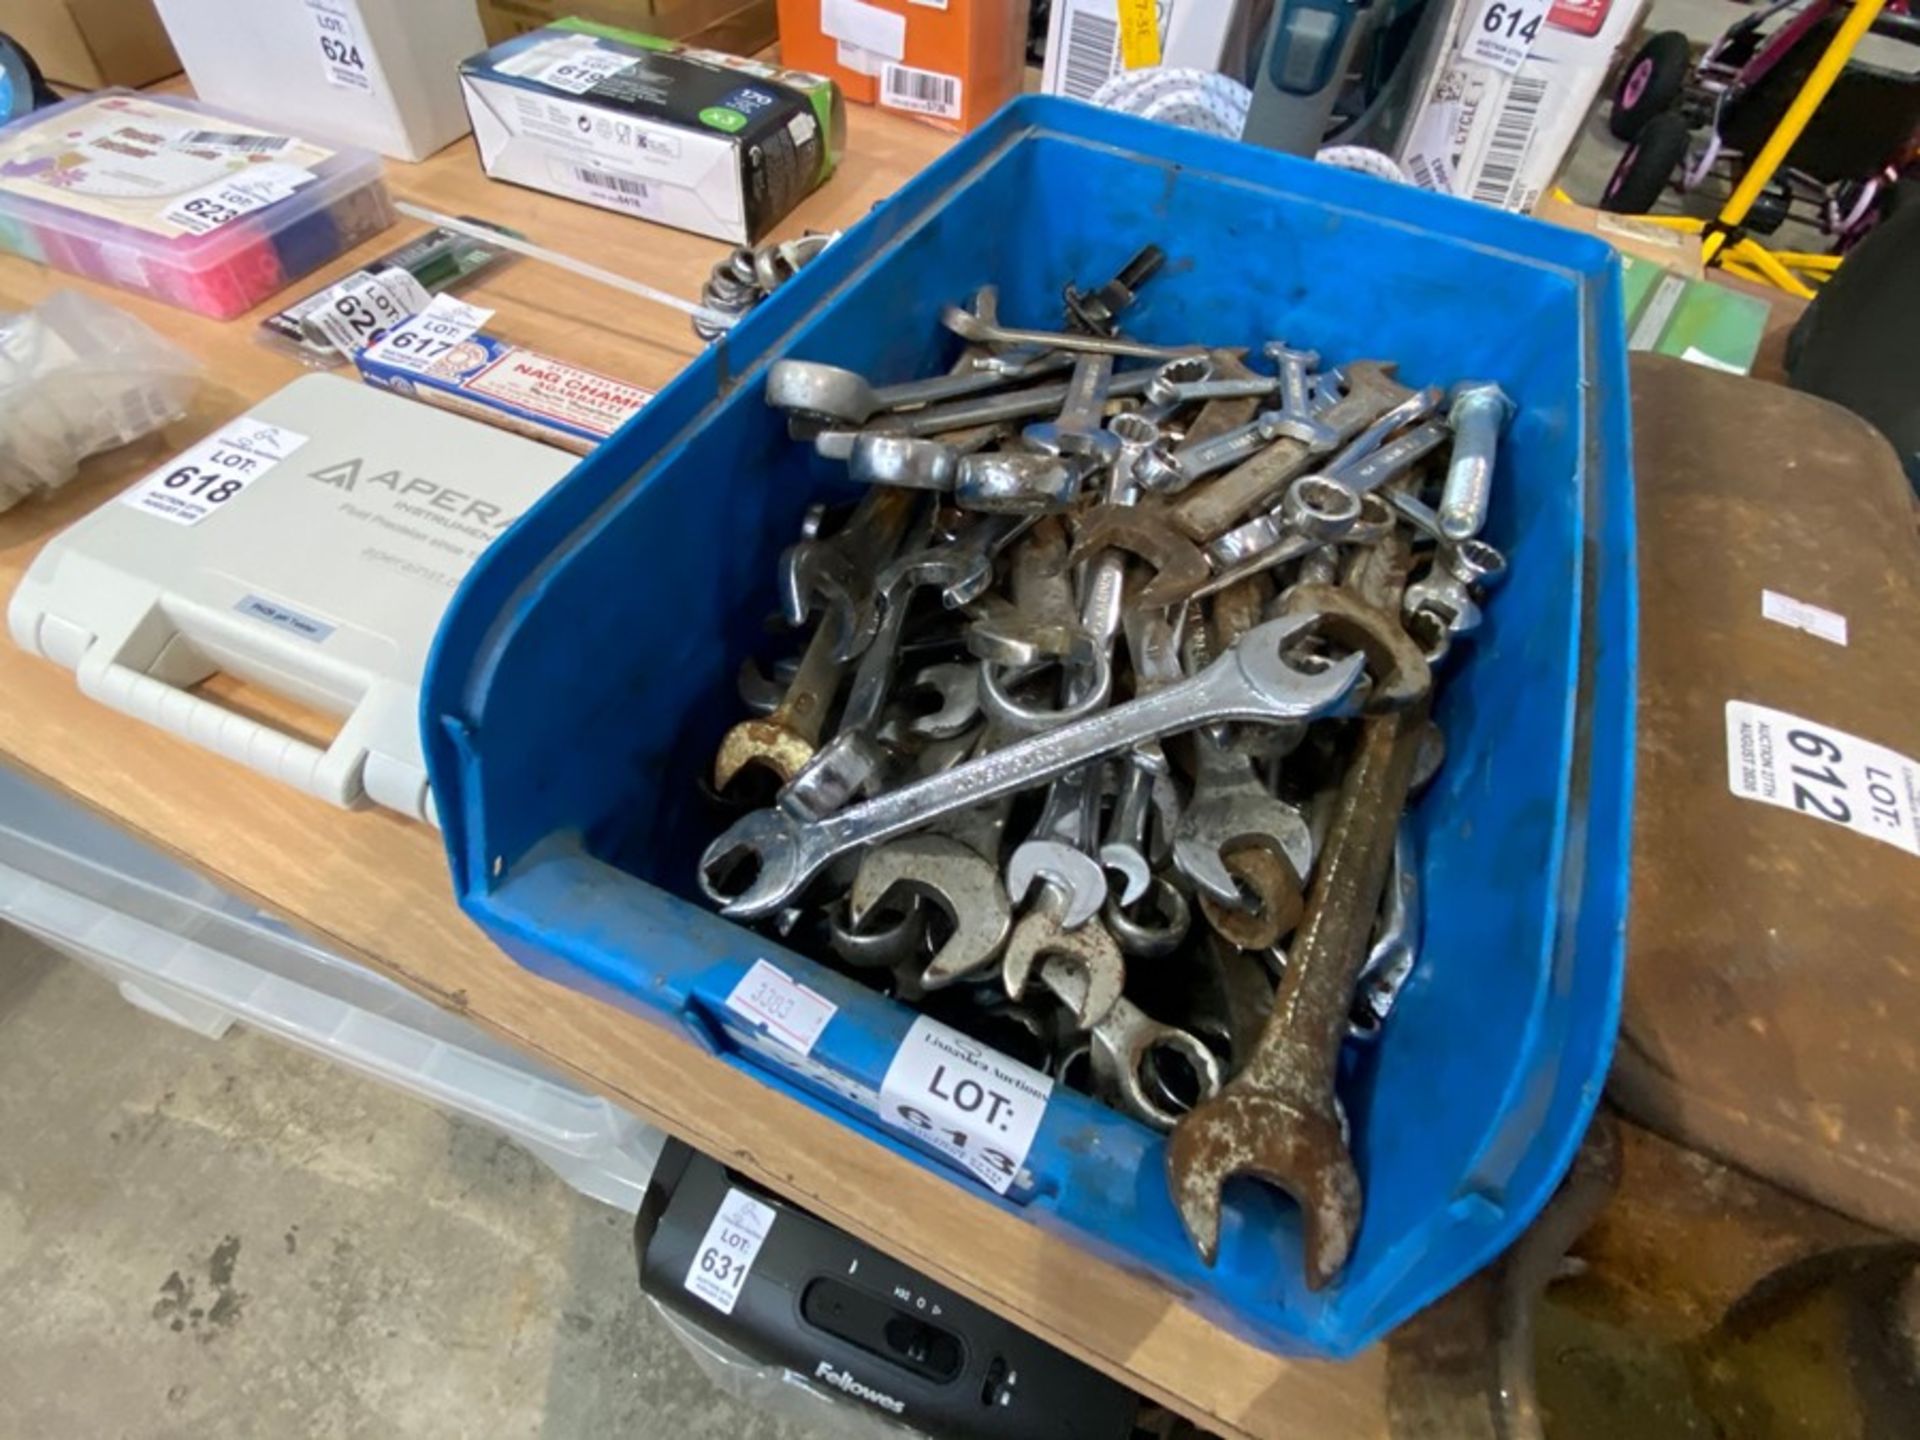 BLUE TUB OF SPANNERS